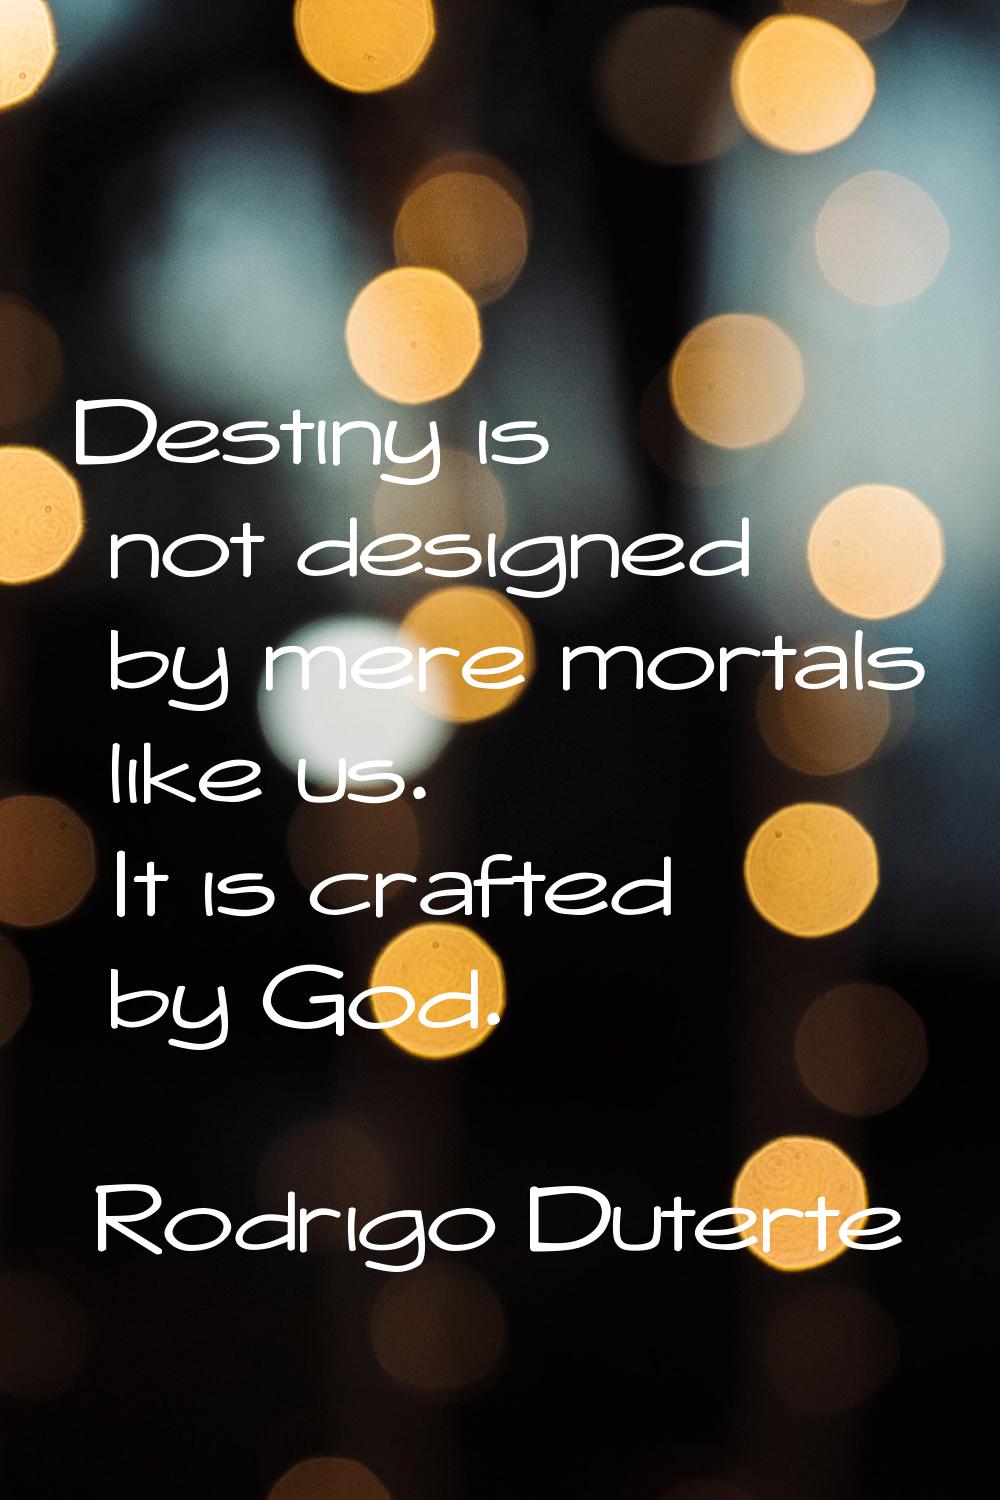 Destiny is not designed by mere mortals like us. It is crafted by God.